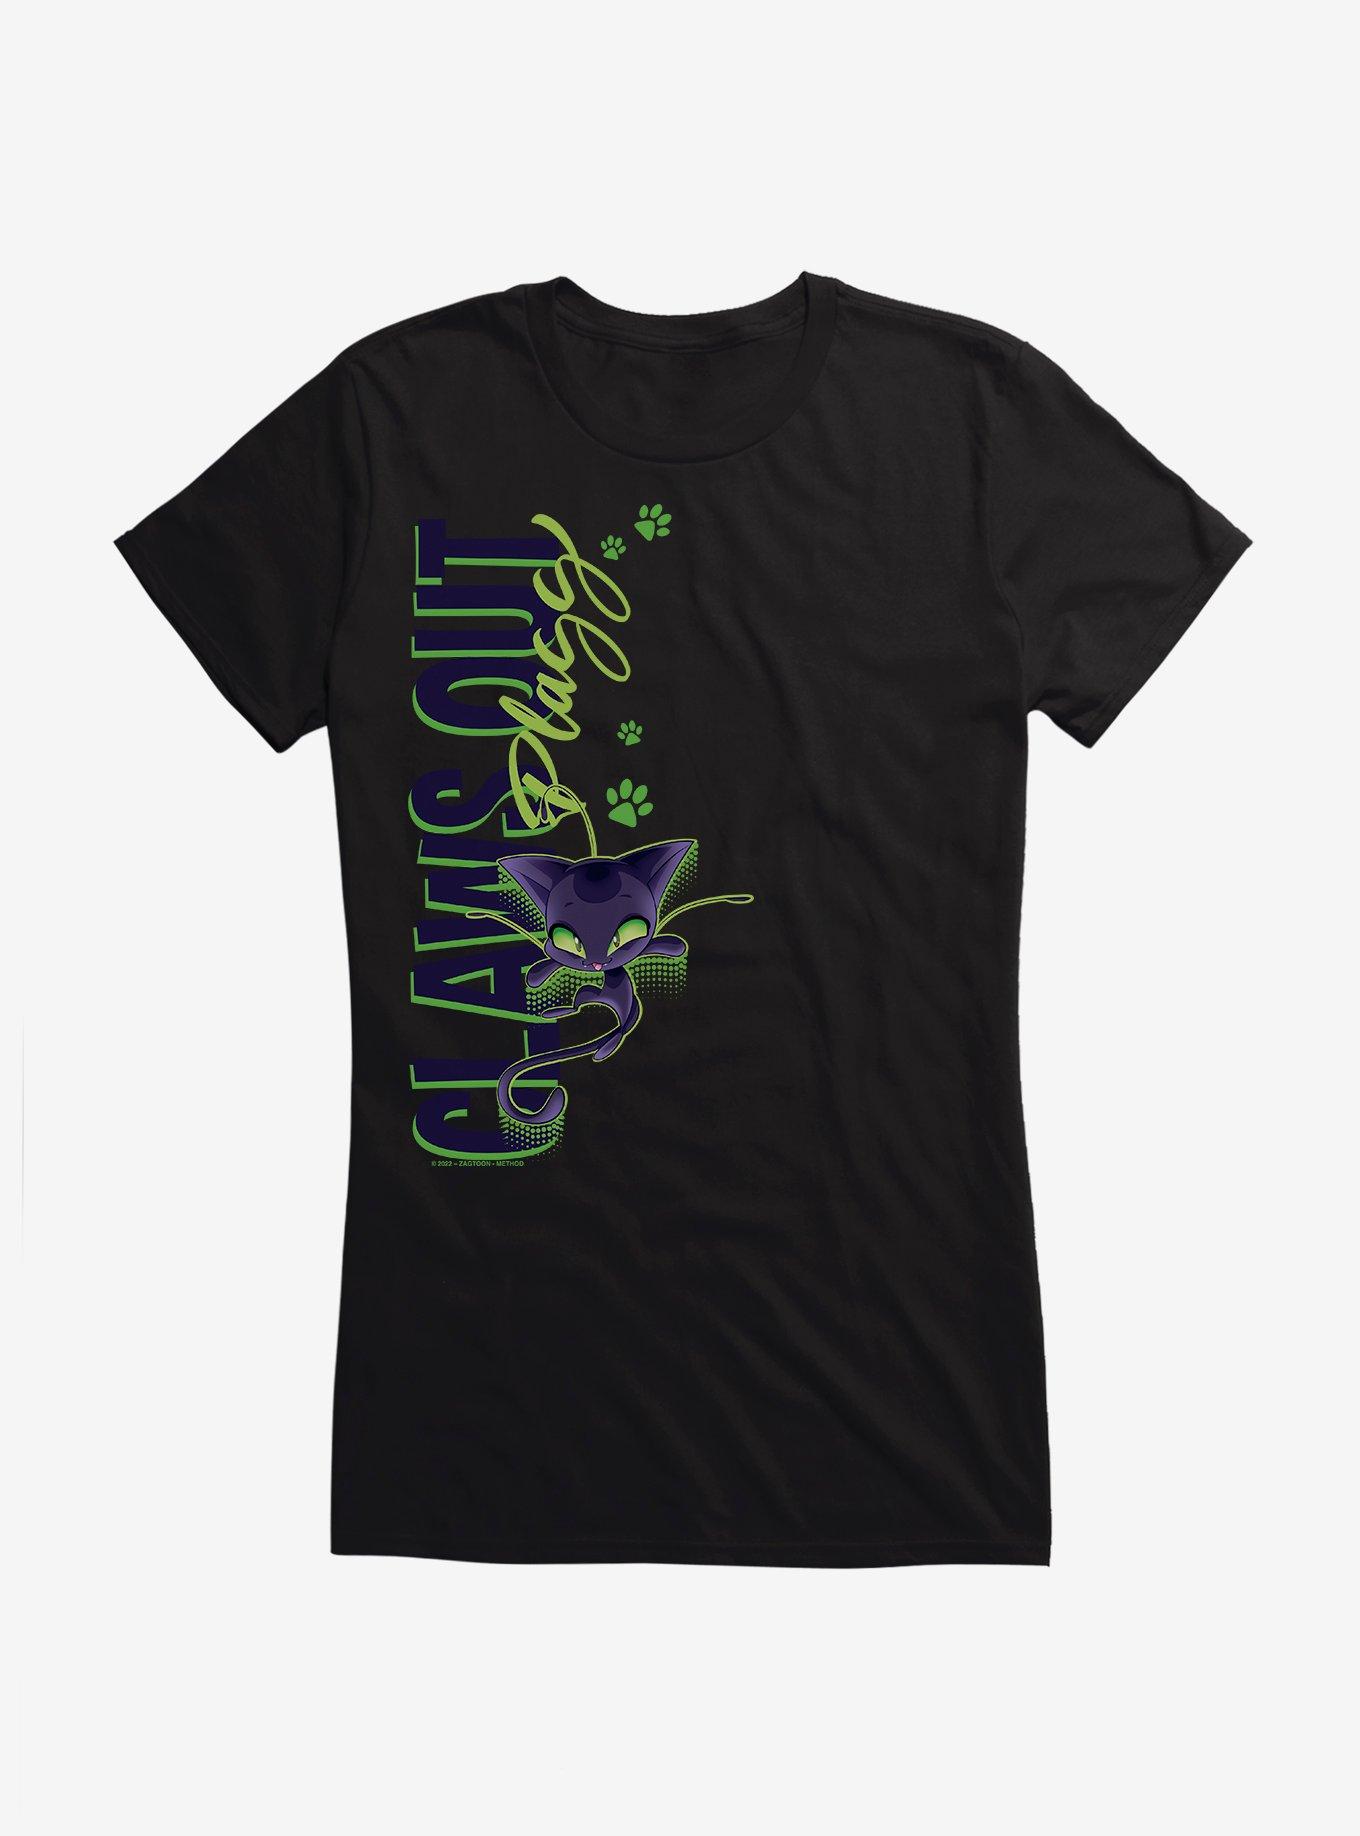 Miraculous: Tales of Ladybug & Cat Noir Claws Out Girls T-Shirt